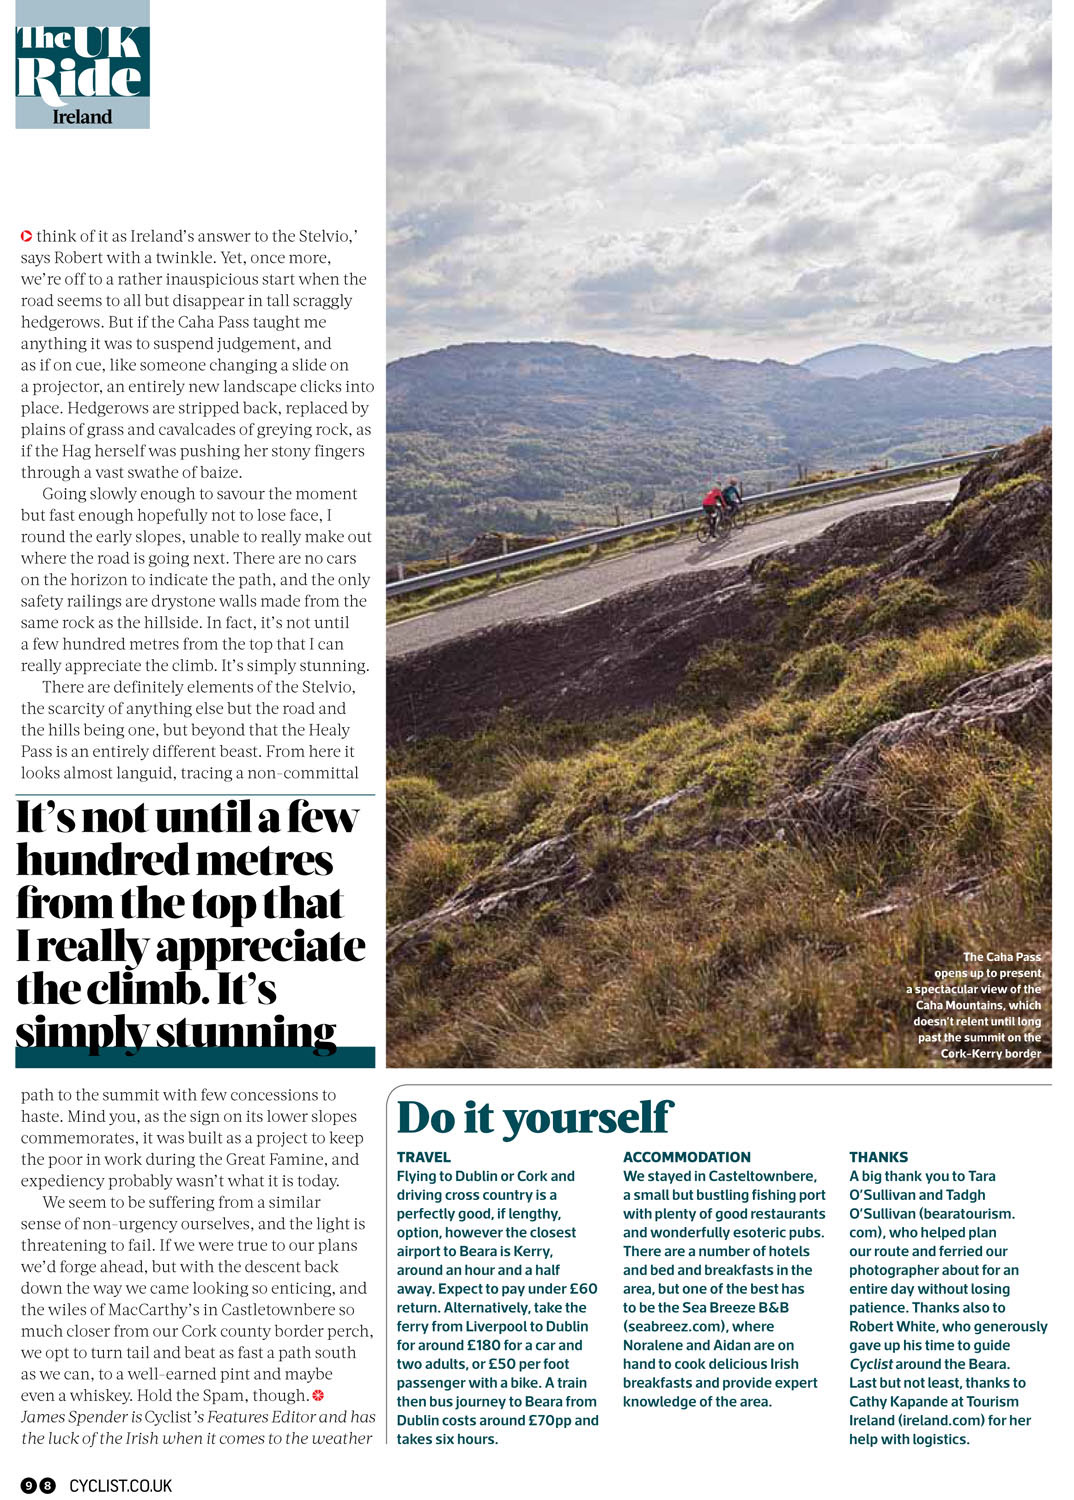 Photography  journalism   Cycling magazine editorial